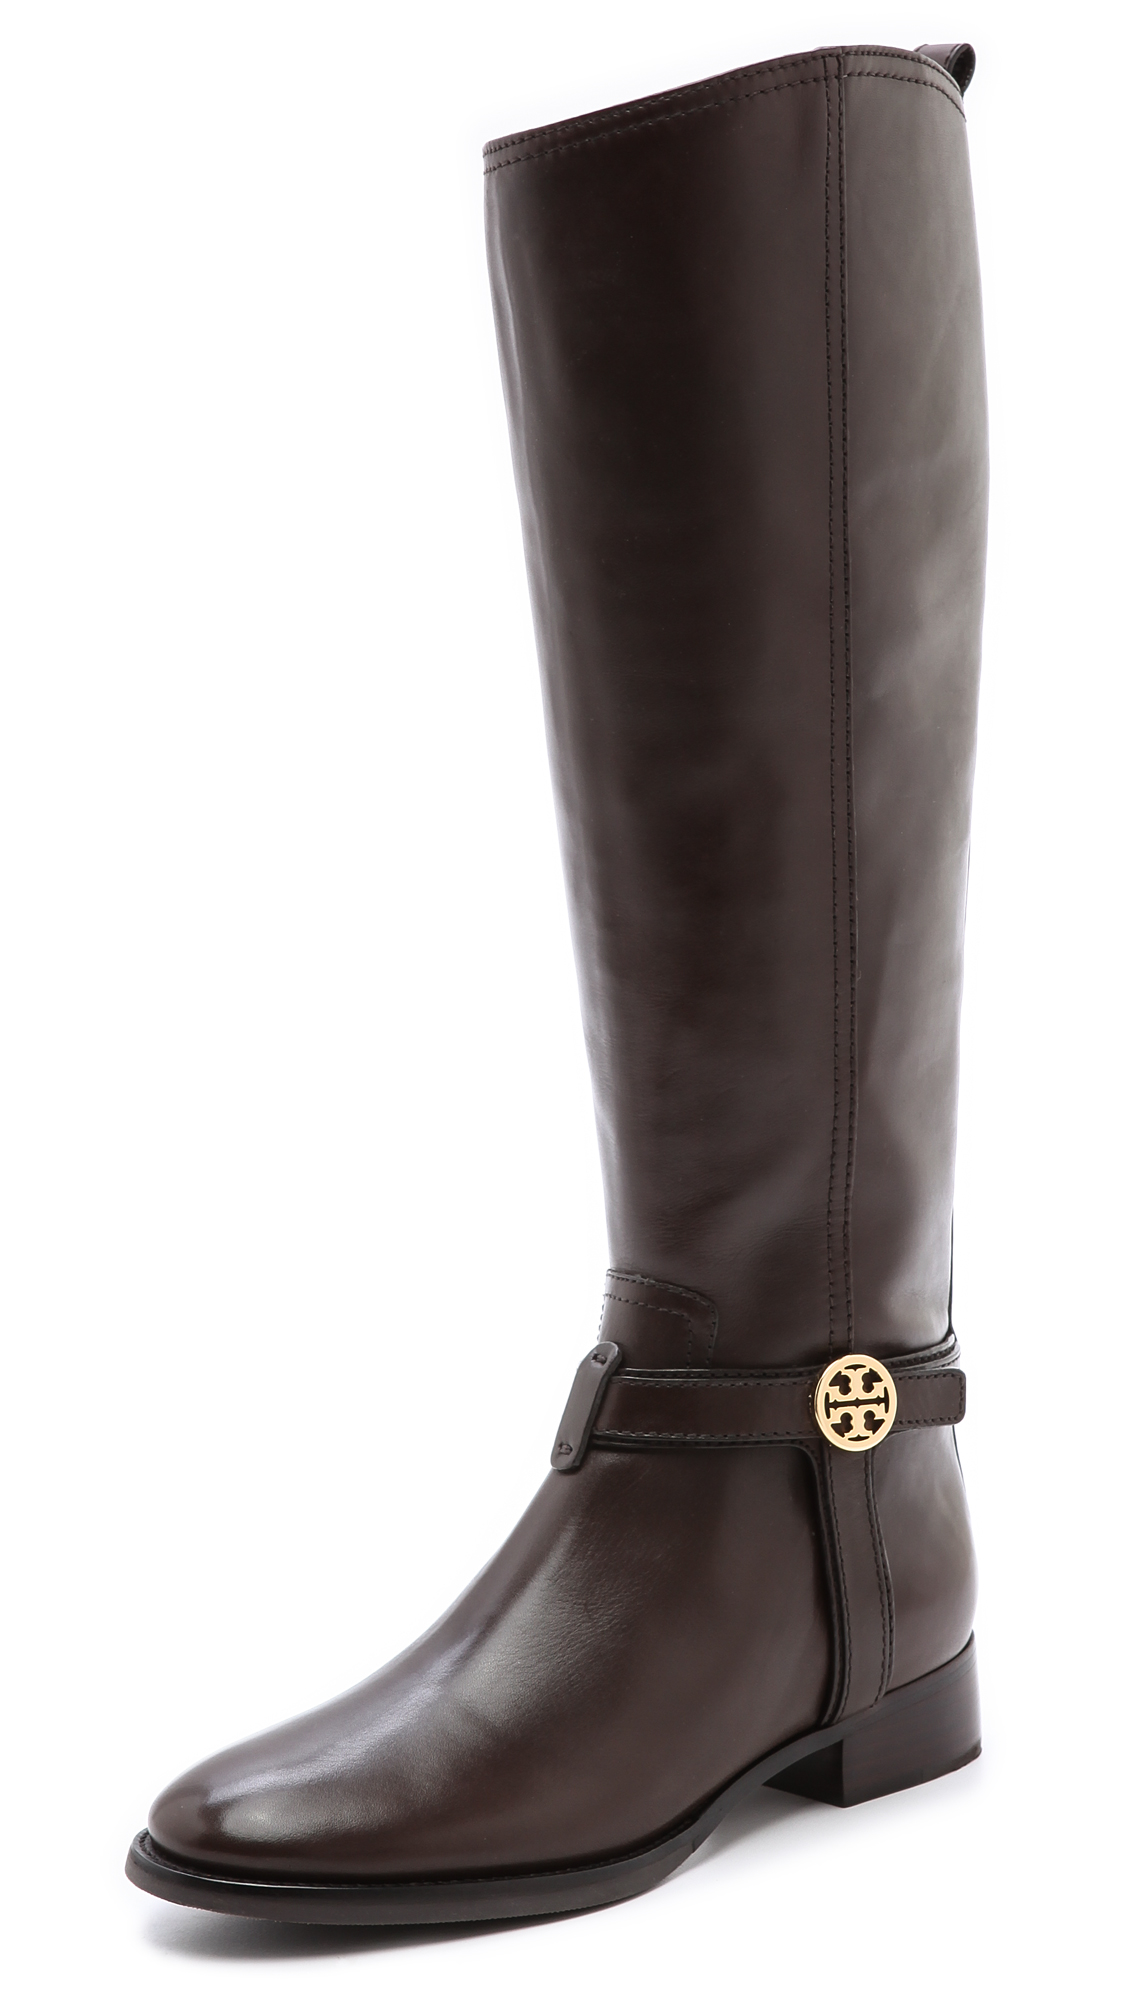 Tory Burch Bristol Riding Boots in Brown - Lyst